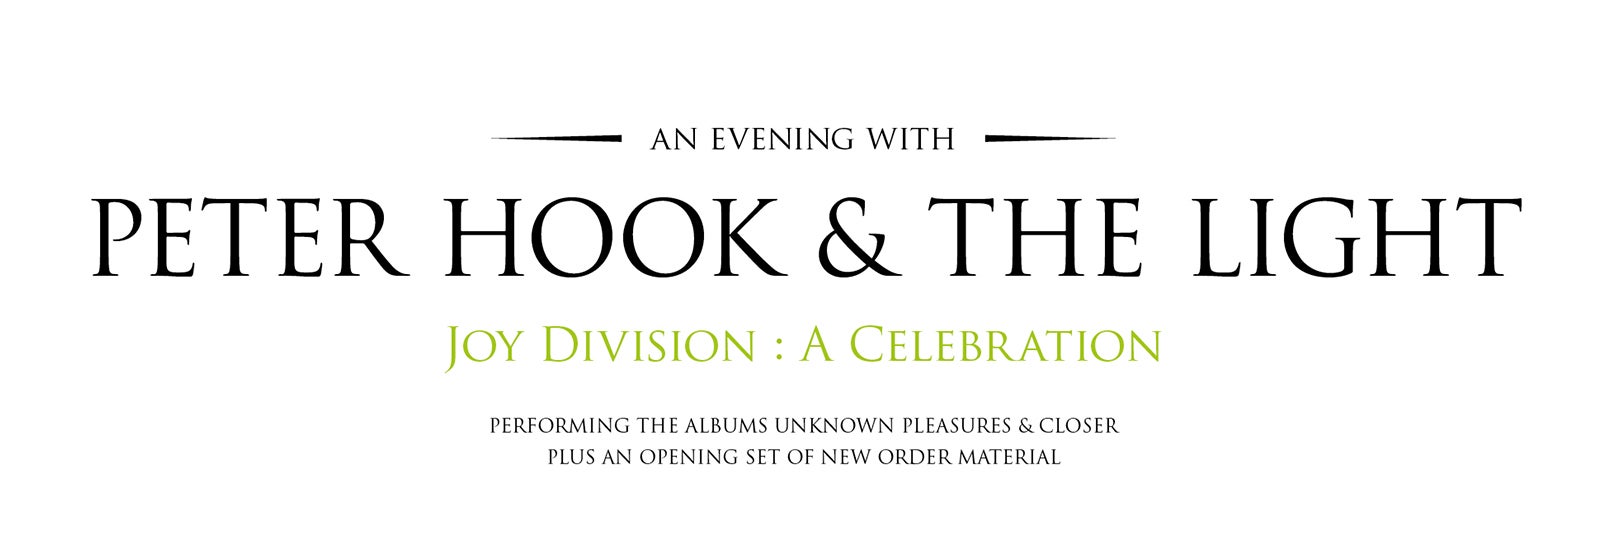 An Evening With Peter Hook & The Light – Joy Division: A Celebration